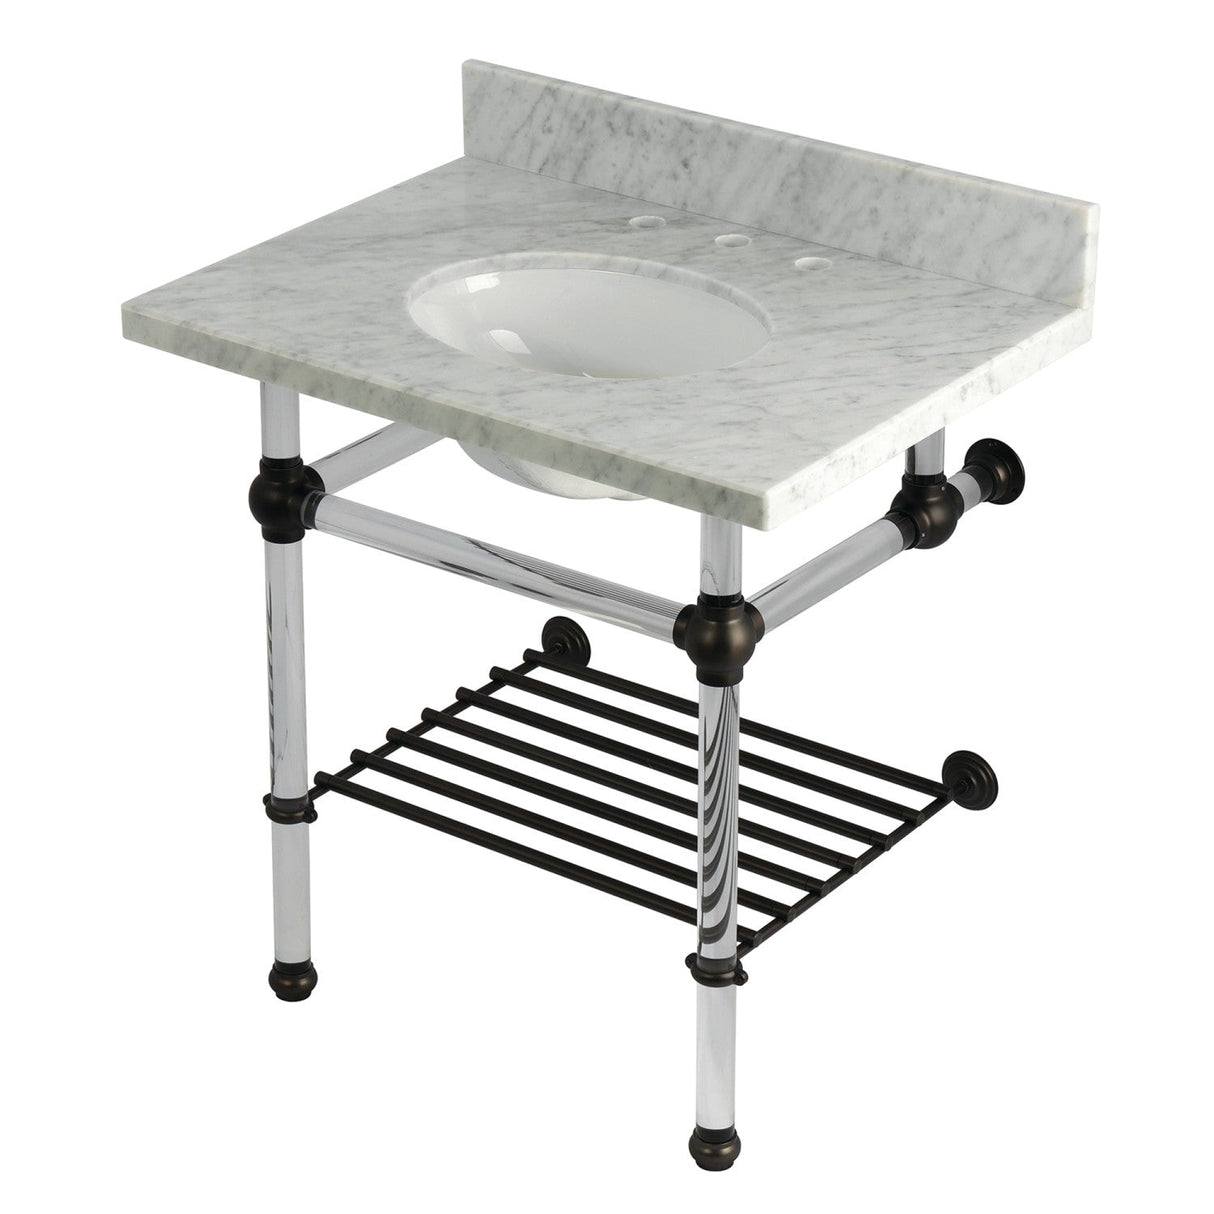 Templeton KVPB3030MAB5 30-Inch Console Sink with Acrylic Legs (8-Inch, 3 Hole), Carrara Marble/Oil Rubbed Bronze